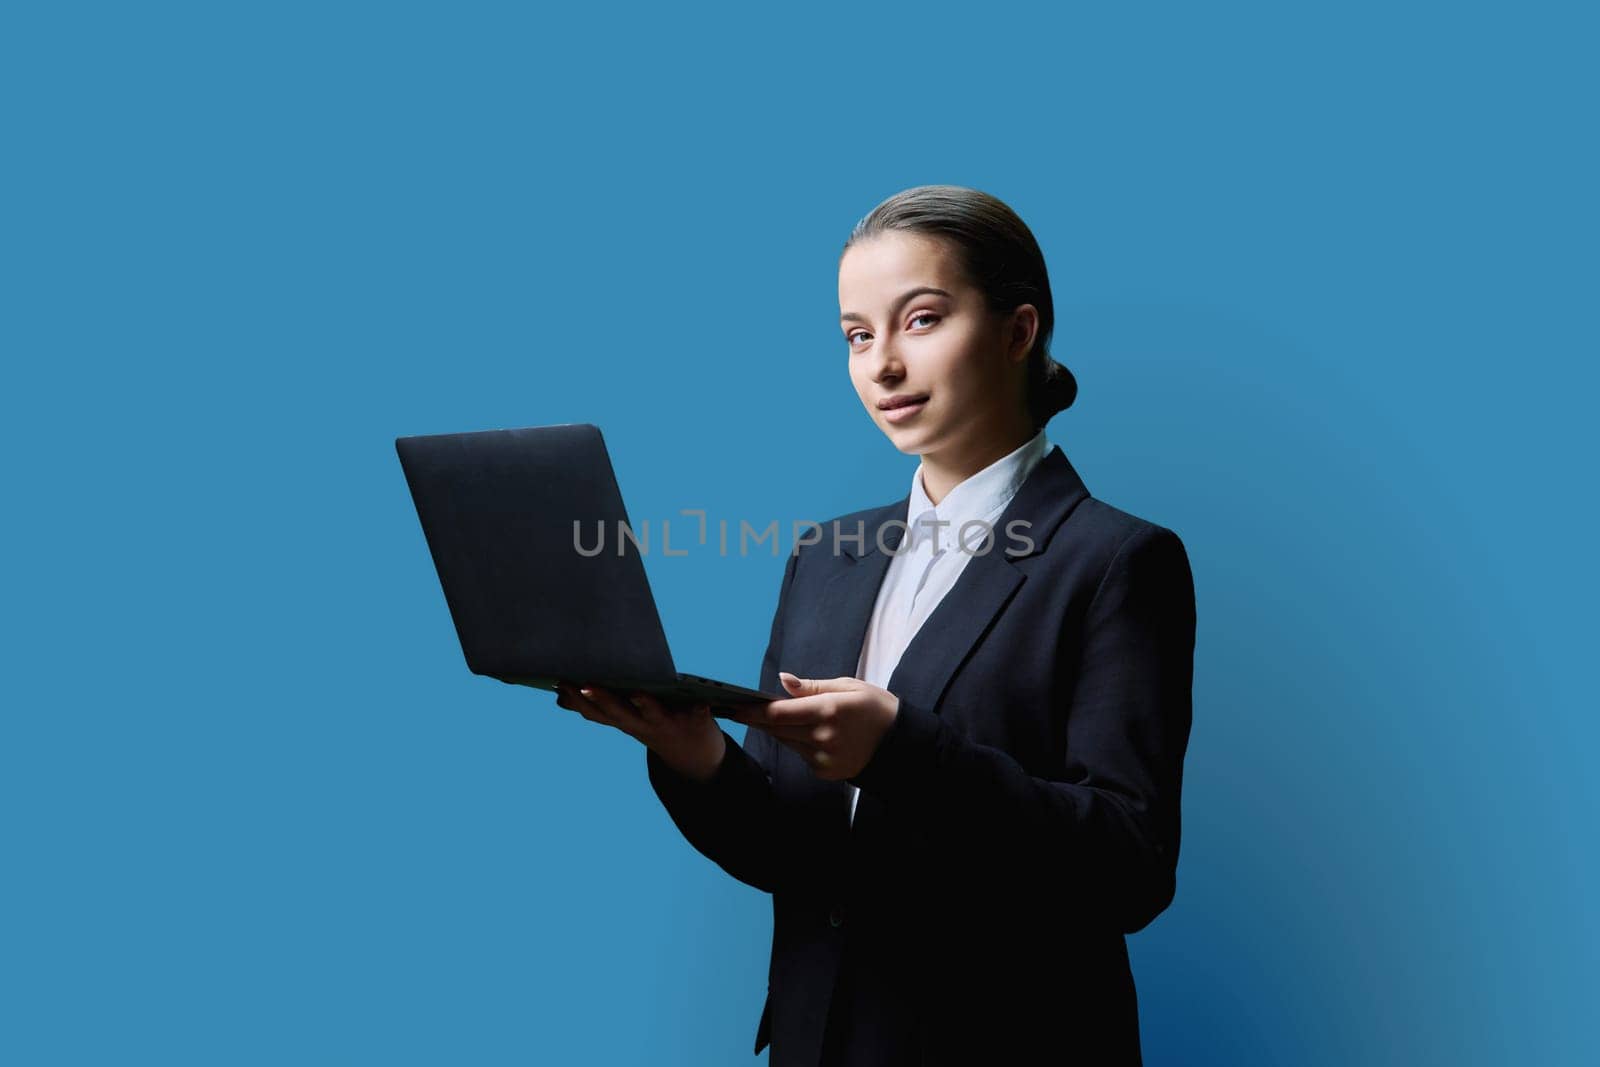 Teenage female student in formal business style using computer laptop, on blue studio background. Digital technologies, education, virtual educational services, online learning, youth concept